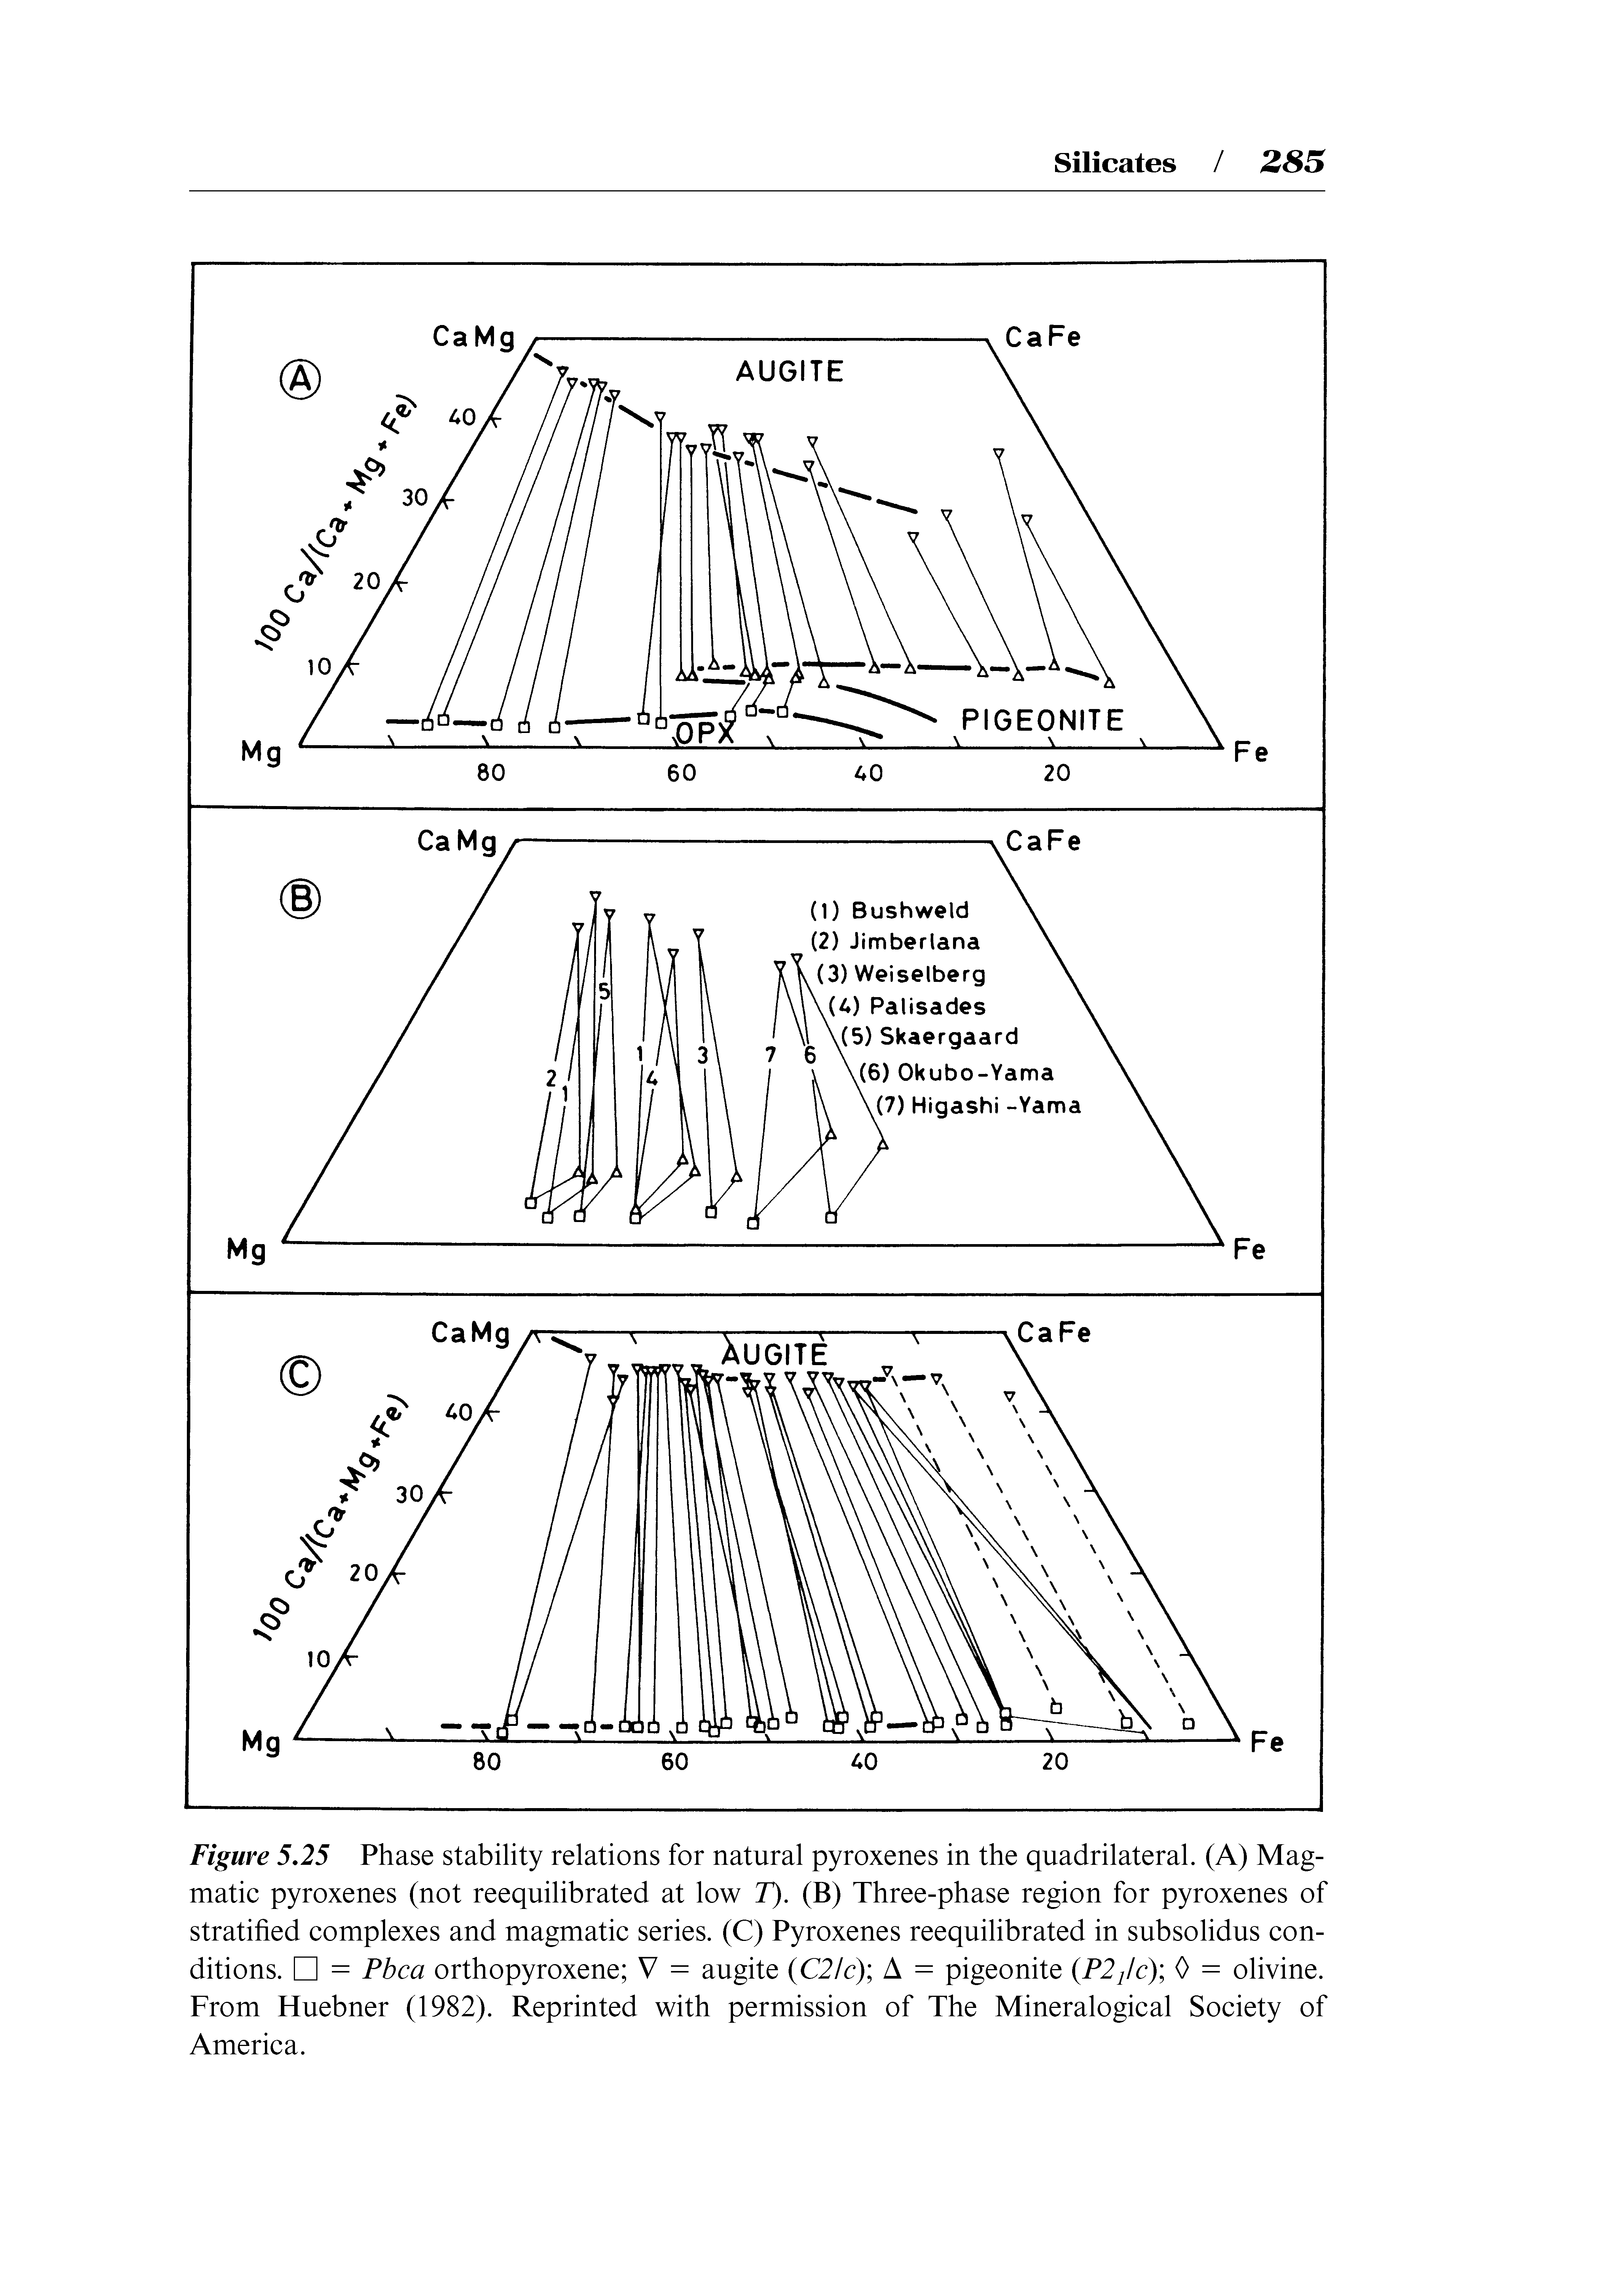 Figure 5,25 Phase stability relations for natural pyroxenes in the quadrilateral. (A) Magmatic pyroxenes (not reequilibrated at low 7). (B) Three-phase region for pyroxenes of stratihed complexes and magmatic series. (C) Pyroxenes reequilibrated in subsolidus conditions. = Pbca orthopyroxene V = augite C2lc) A = pigeonite (P2jlc) 0 = olivine. From Huebner (1982). Reprinted with permission of The Mineralogical Society of America.